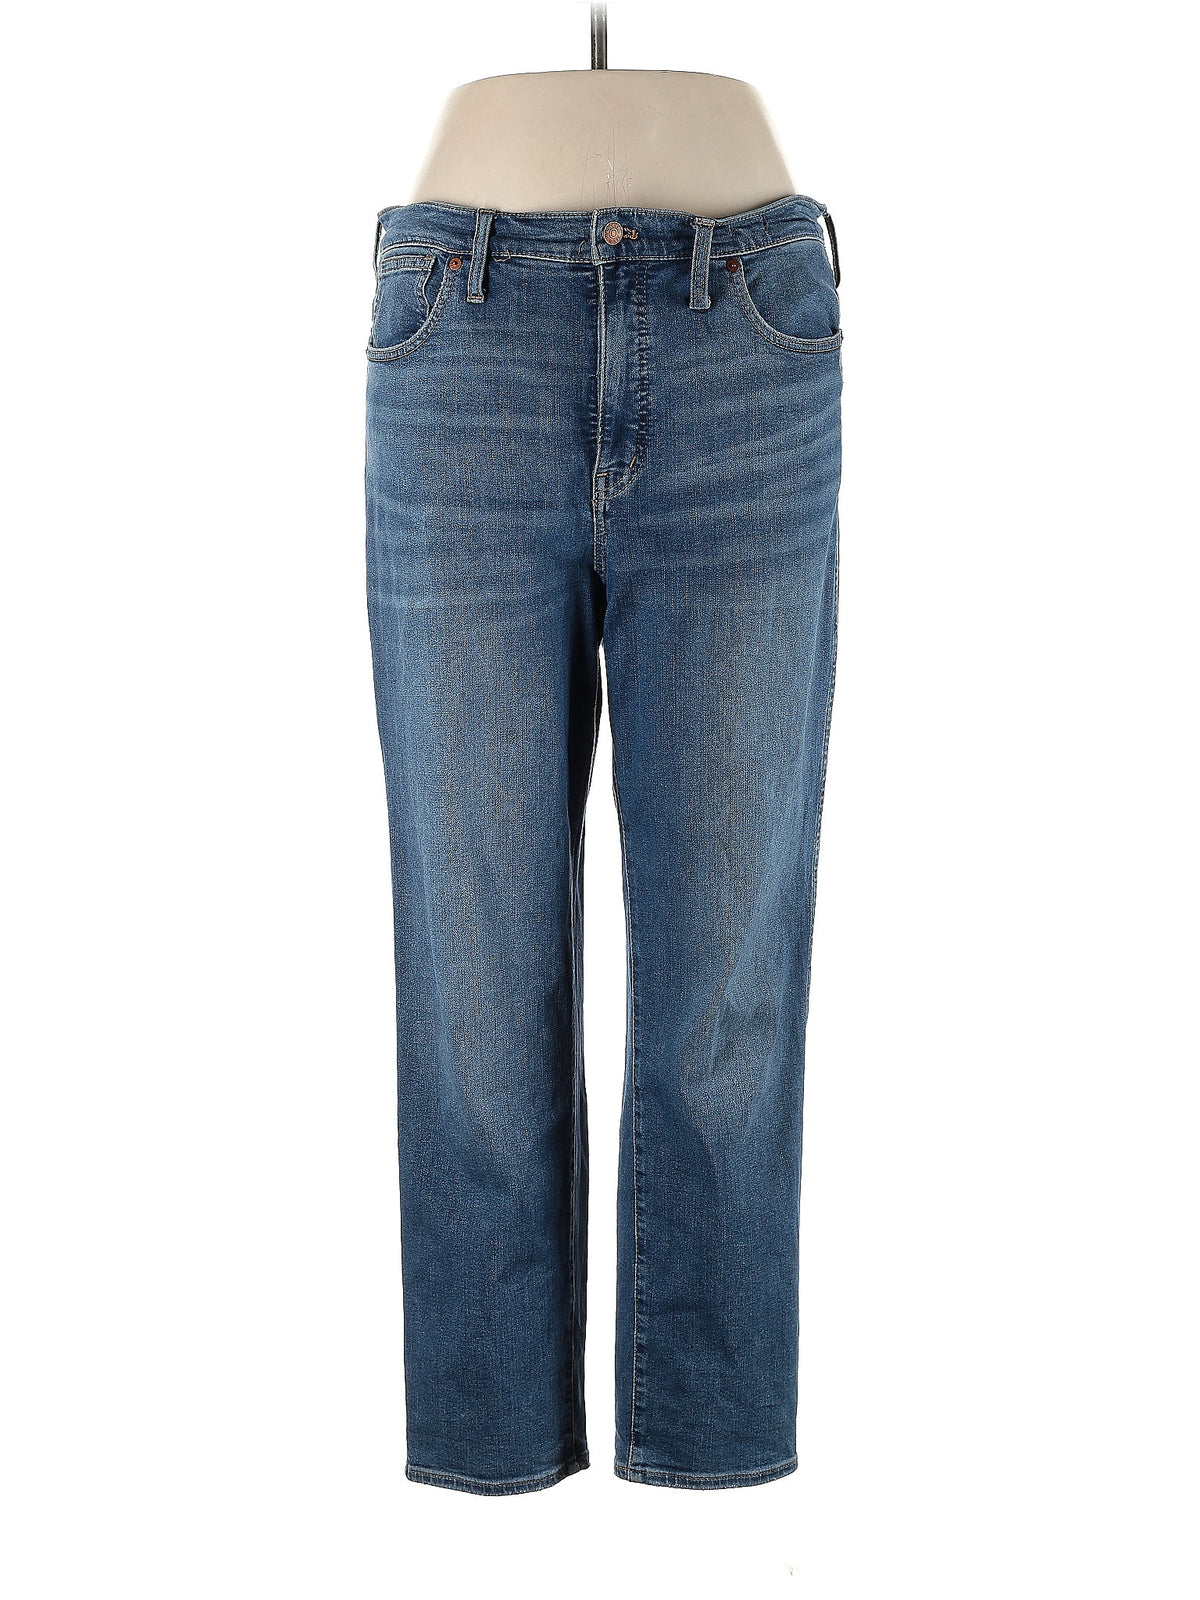 High-Rise Straight-leg Stovepipe Jeans In Dearham Wash in Medium Wash waist size - 31